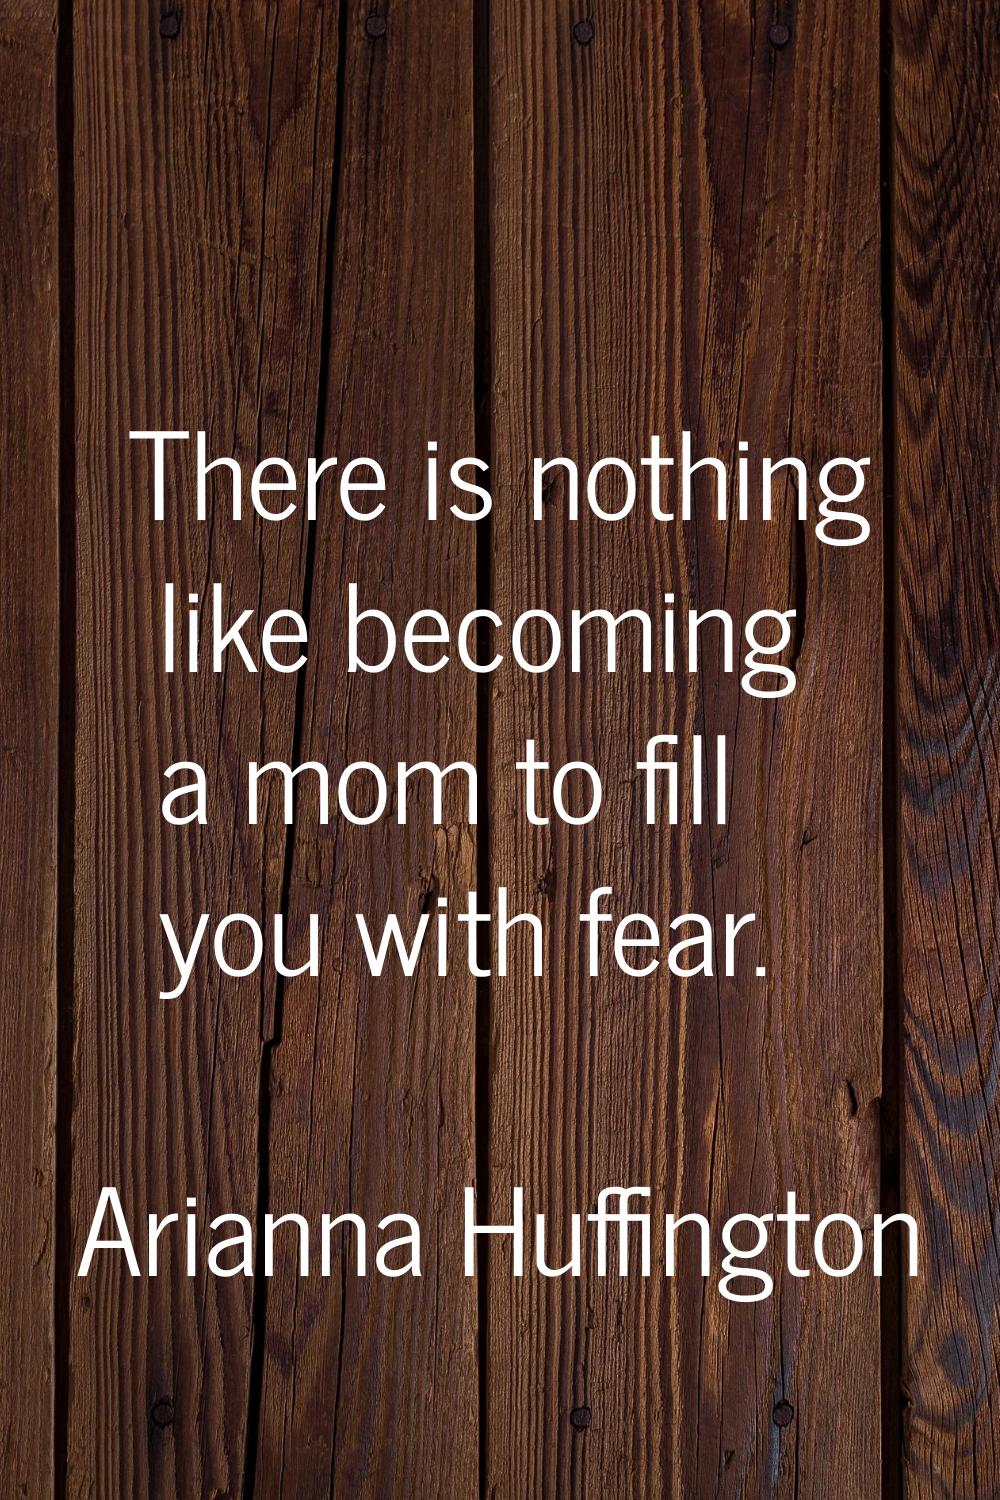 There is nothing like becoming a mom to fill you with fear.